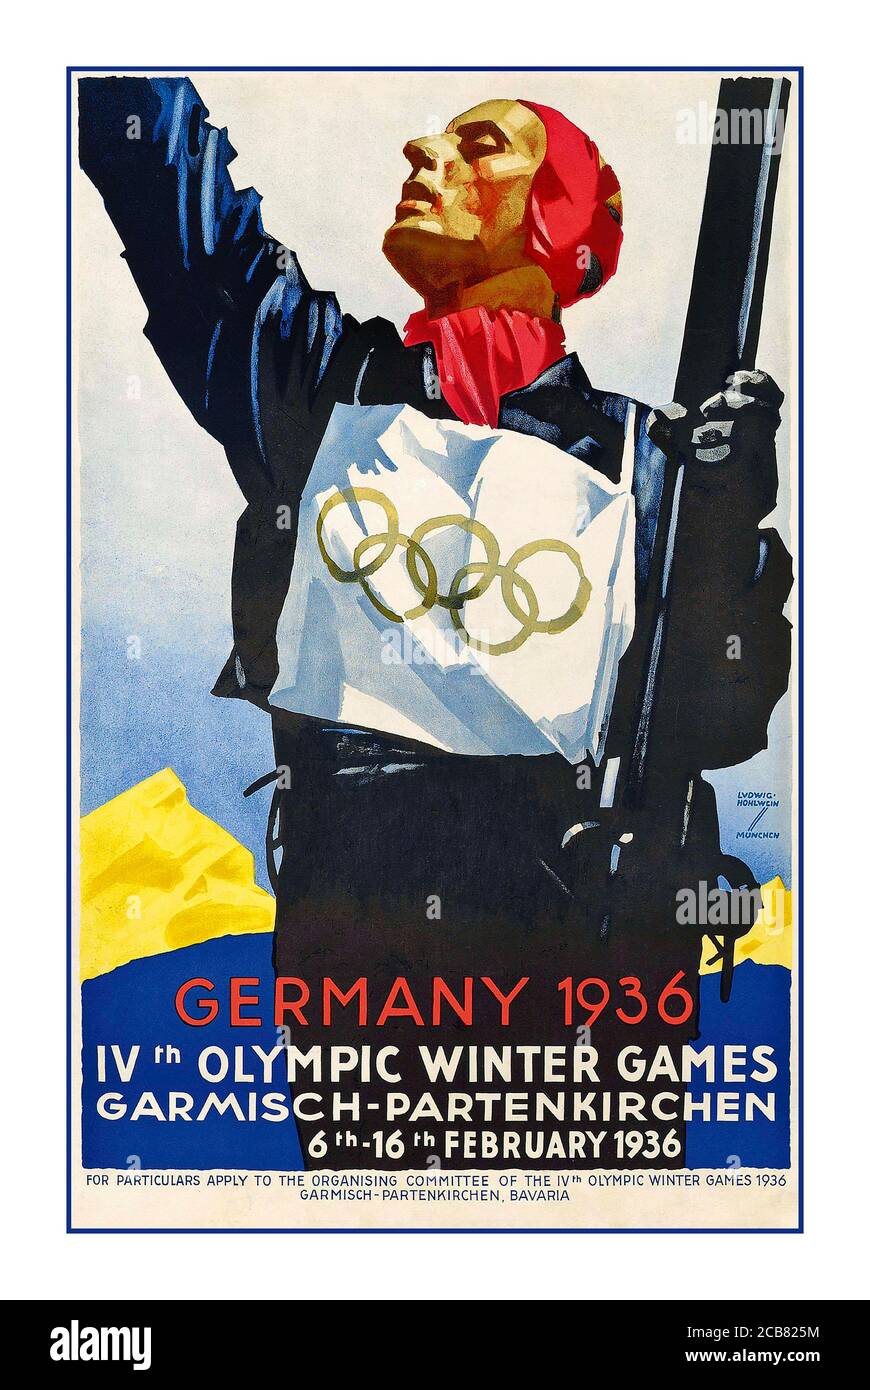 1936 vintage Winter Olympics sport poster in Danish: Tyskland 1936 (Nazi Germany / The Third Reich / Germany 1936) IV Winter Olympiade (Winter Olympics) Garmisch-Partenkirchen 6-16 February 1936. image depicting a skier with bib featuring the Olympic rings symbol, celebrating victory with mountain in background. Poster artwork by Ludwig Hohlwein (1874-1949). Published by the Reichsbahn Centrale for German Travel Agents  Berlin Germany Stock Photo